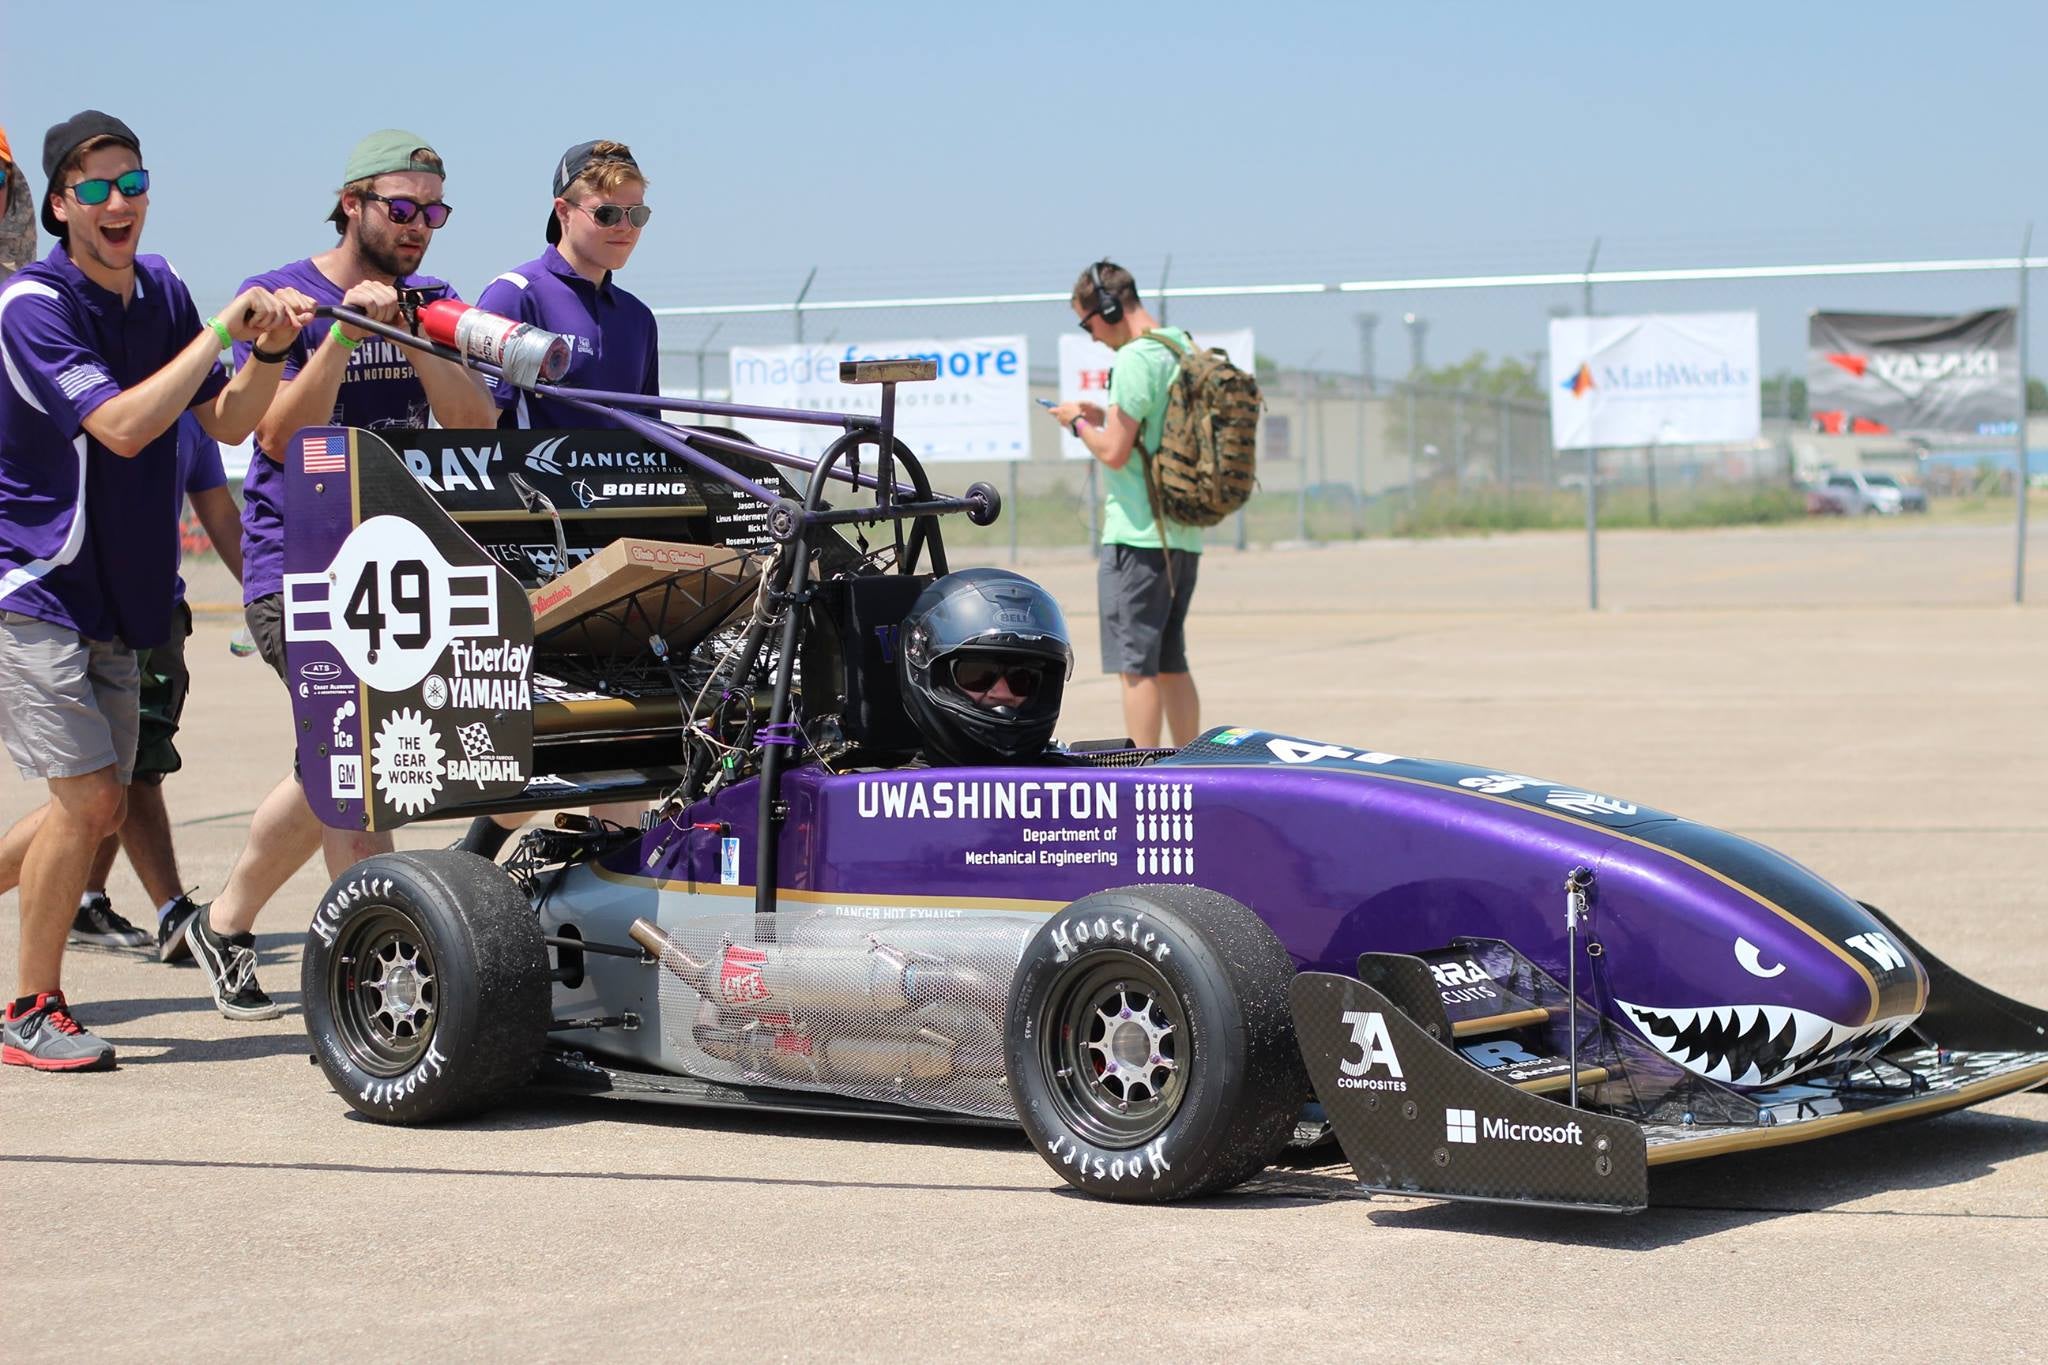 University of Washington's Formula Motorsports team, comprised of largely engineering students, built this lightweight 355 lb vehicle in only 9 months. Its powerful Yamaha YFZ-450OR engine can produce nearly 60hp. It also features a carbon fiber chassis, aero package, and custom Double A- arm suspension. 